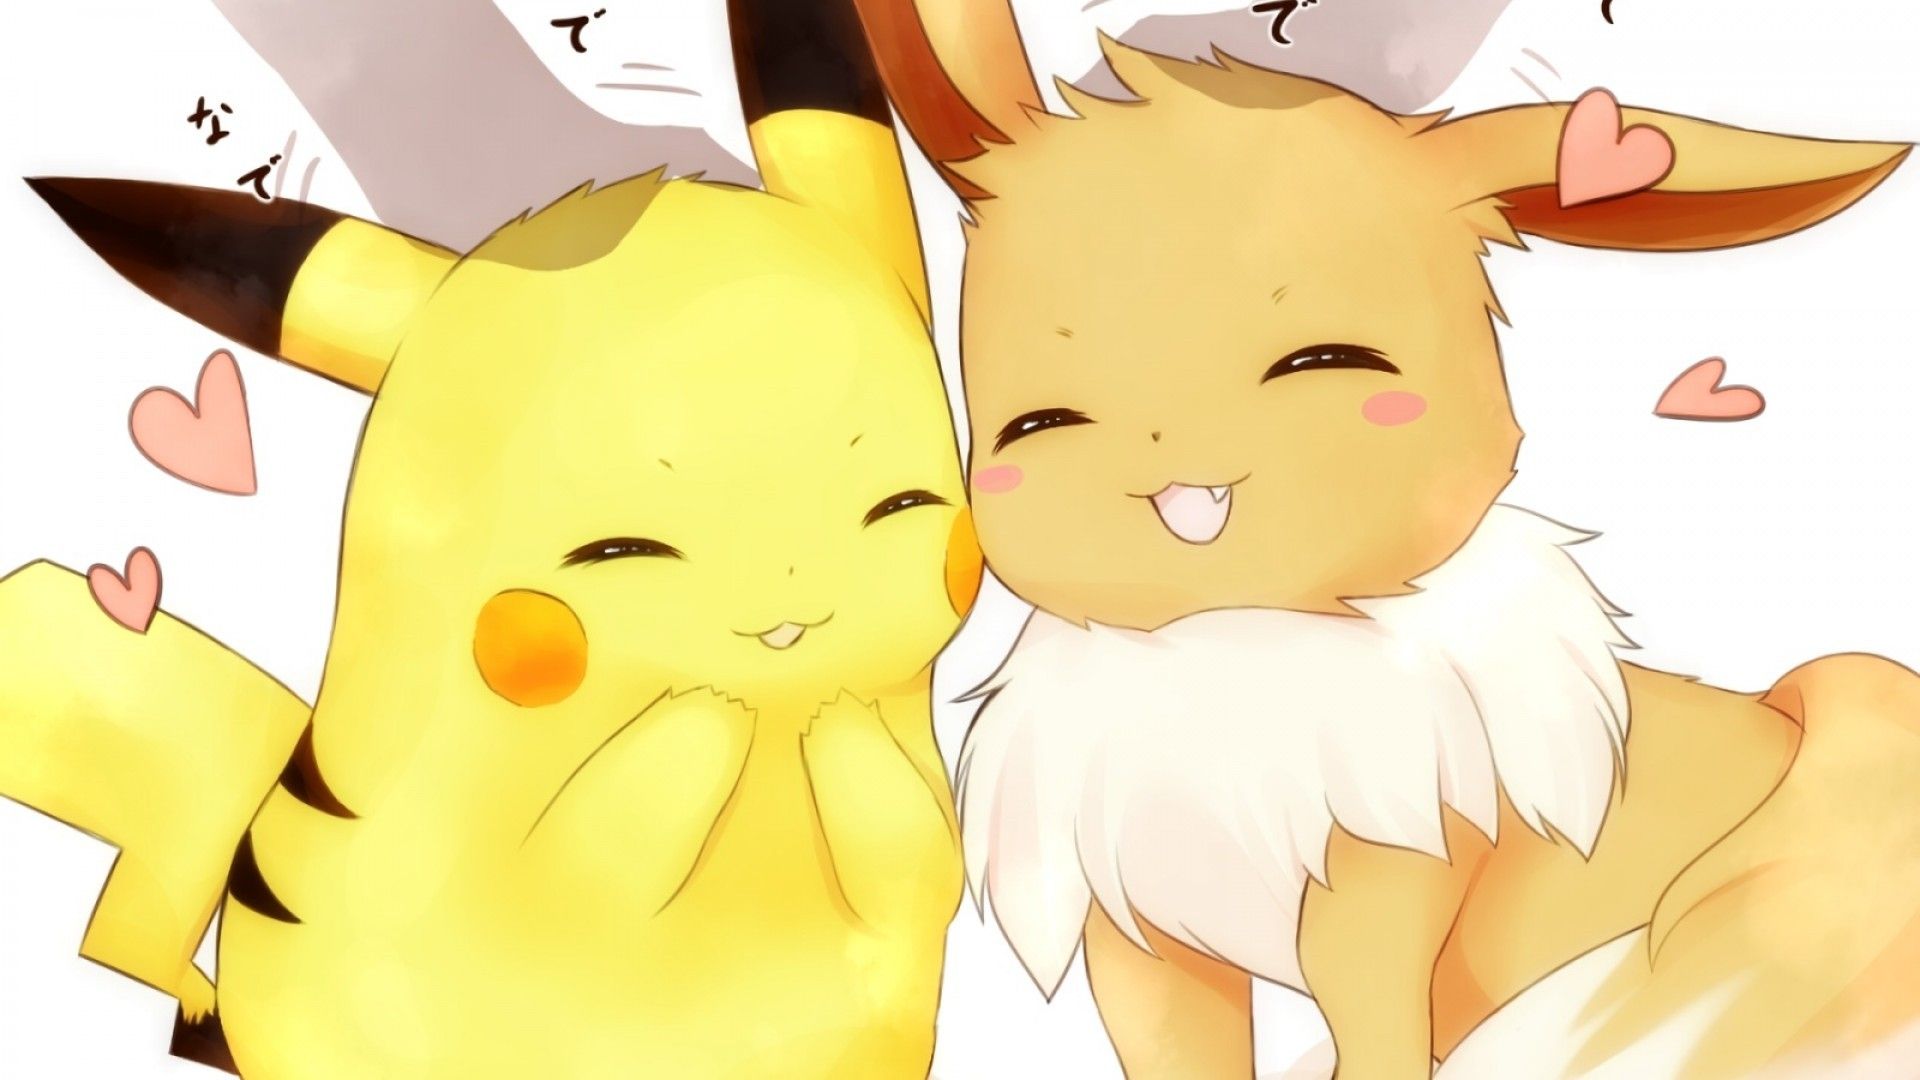 Image Of Cute Pikachu Hd Wallpapers For Phone.